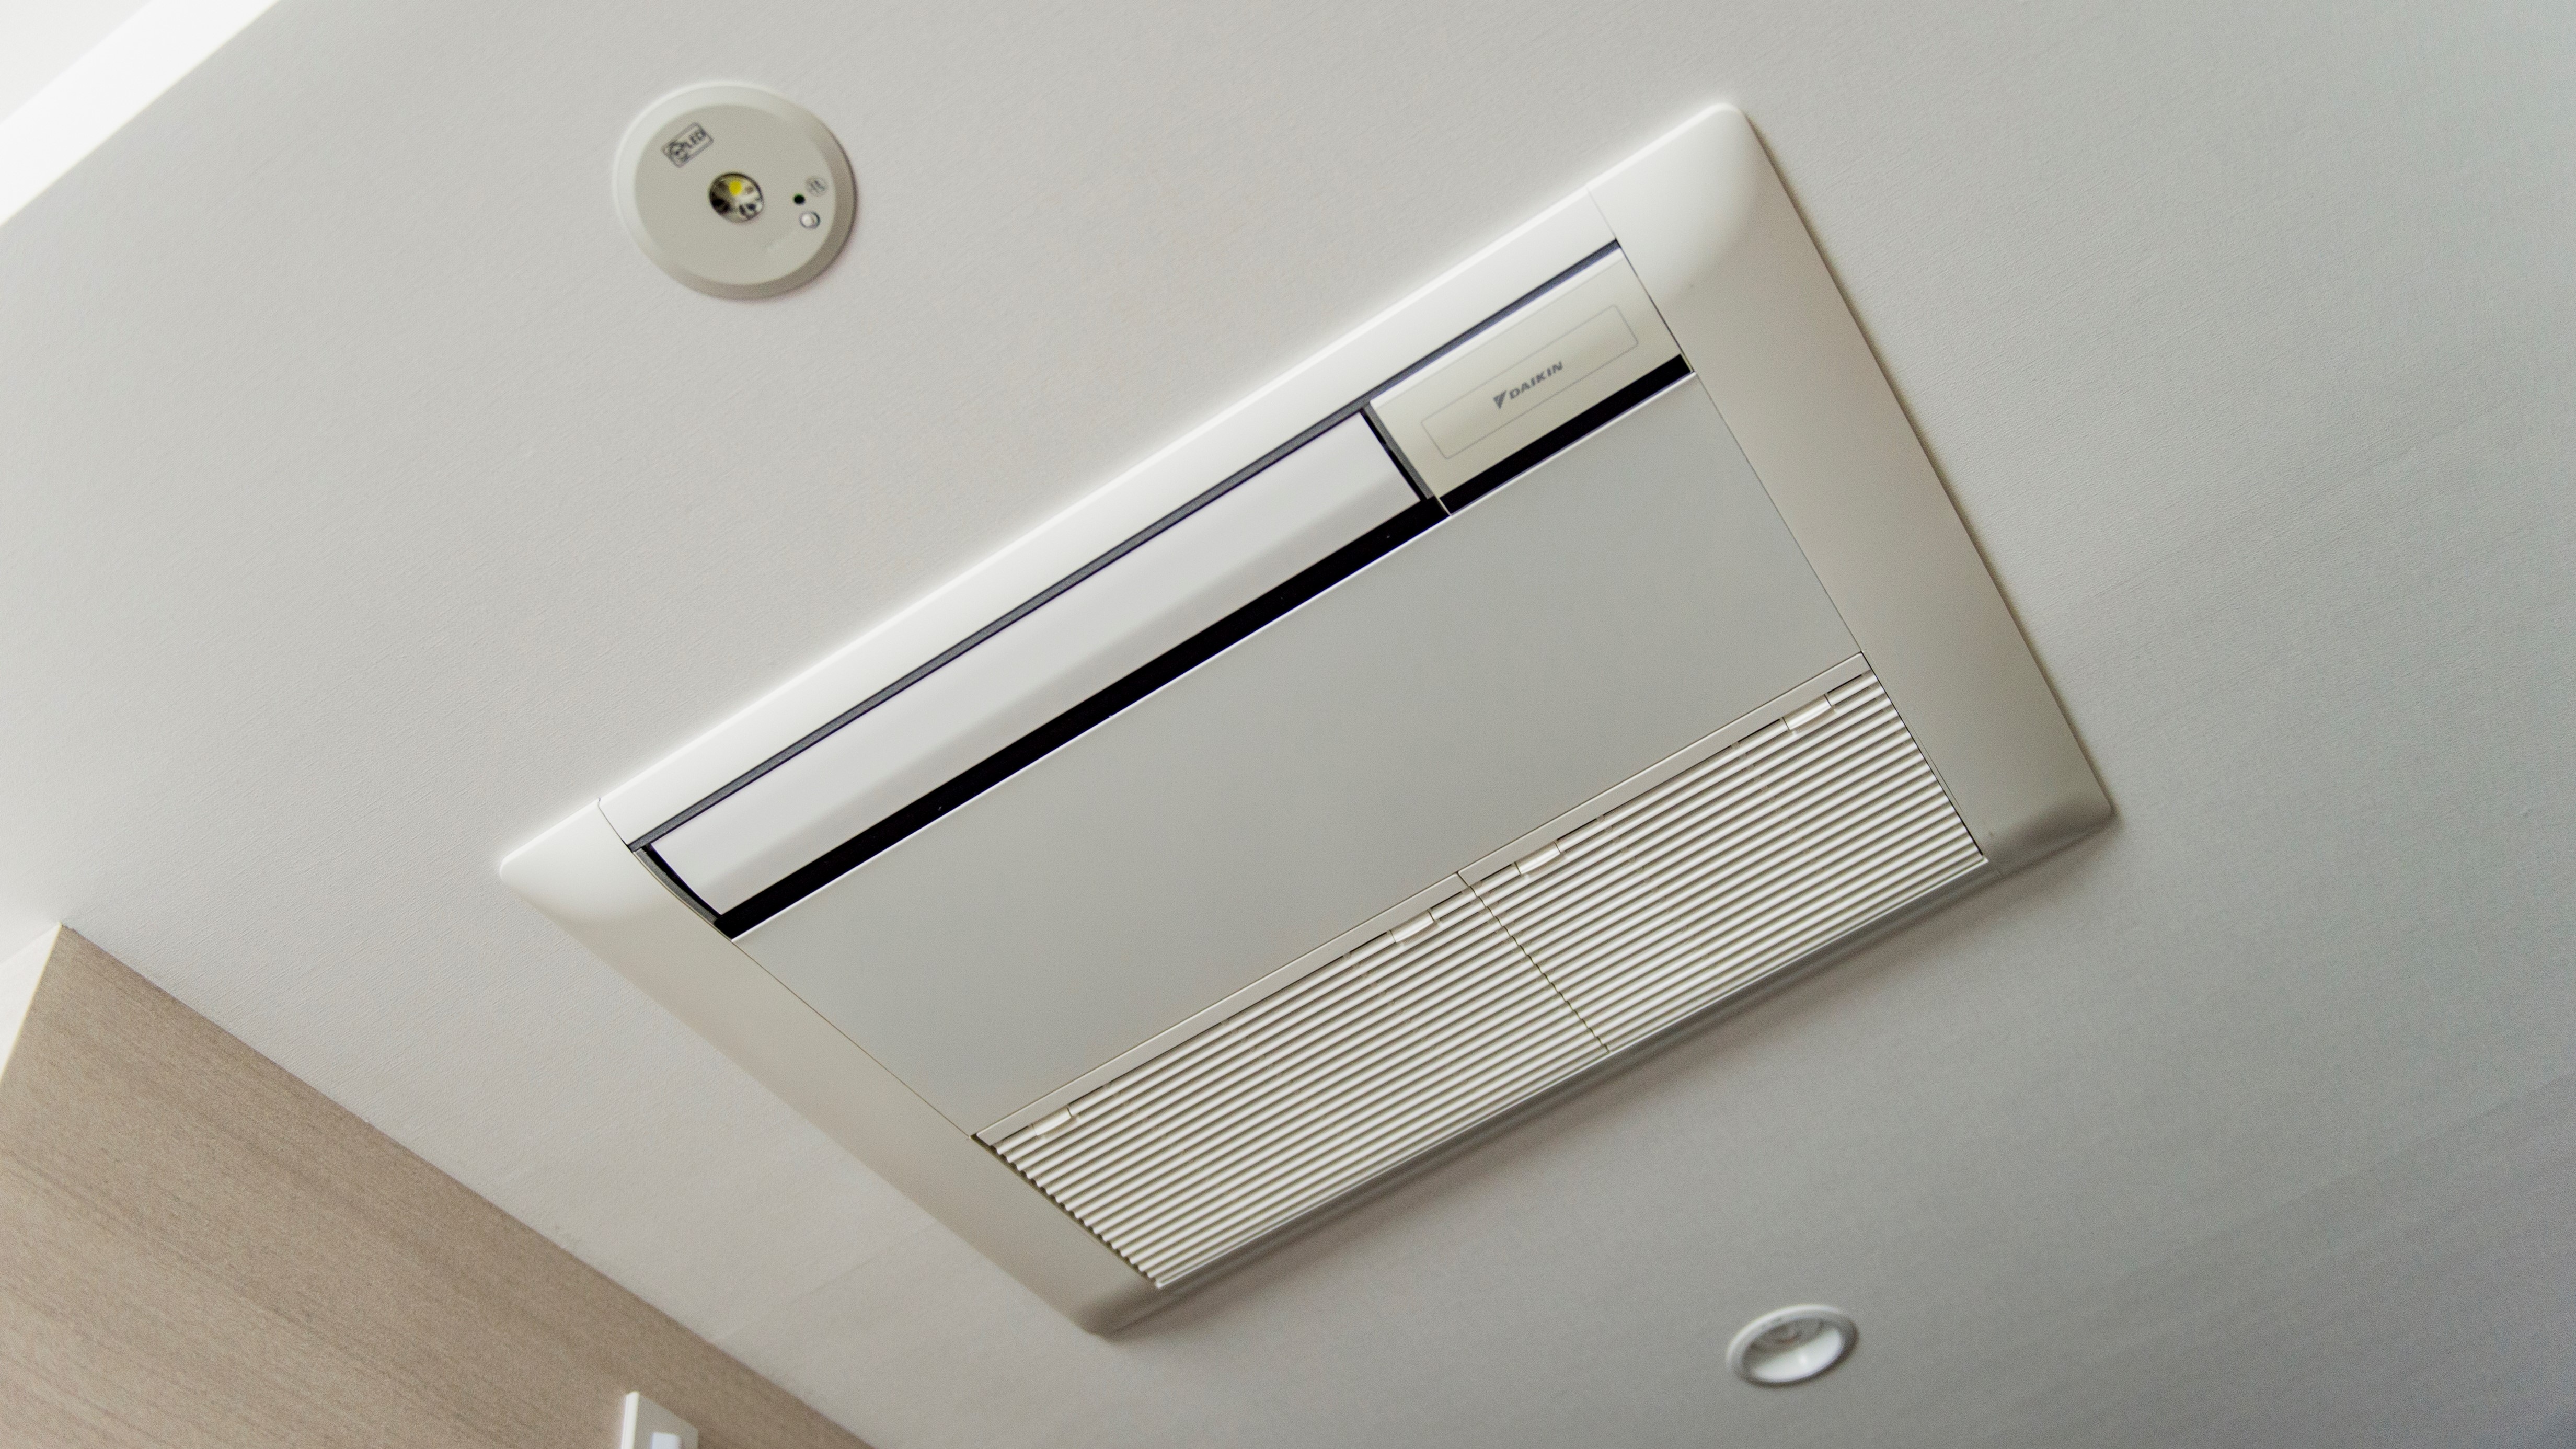 ◆ Room equipment: Air conditioner can be set for each room